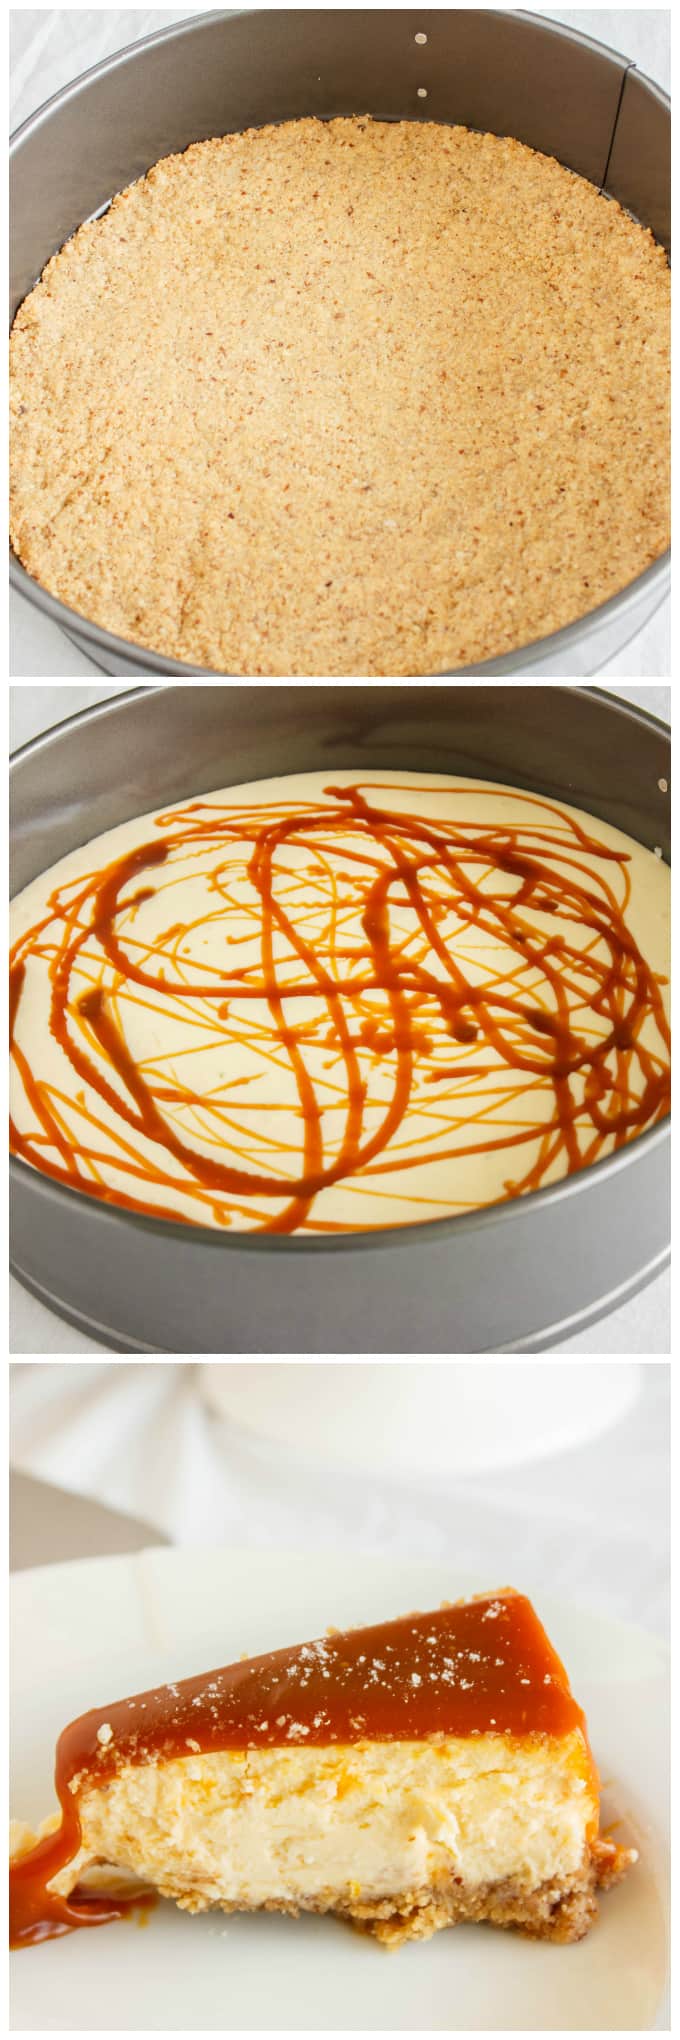 Salted Caramel Cheesecake in cooking pot solo dough and dough with caramel frosting, slice of cake on white plate